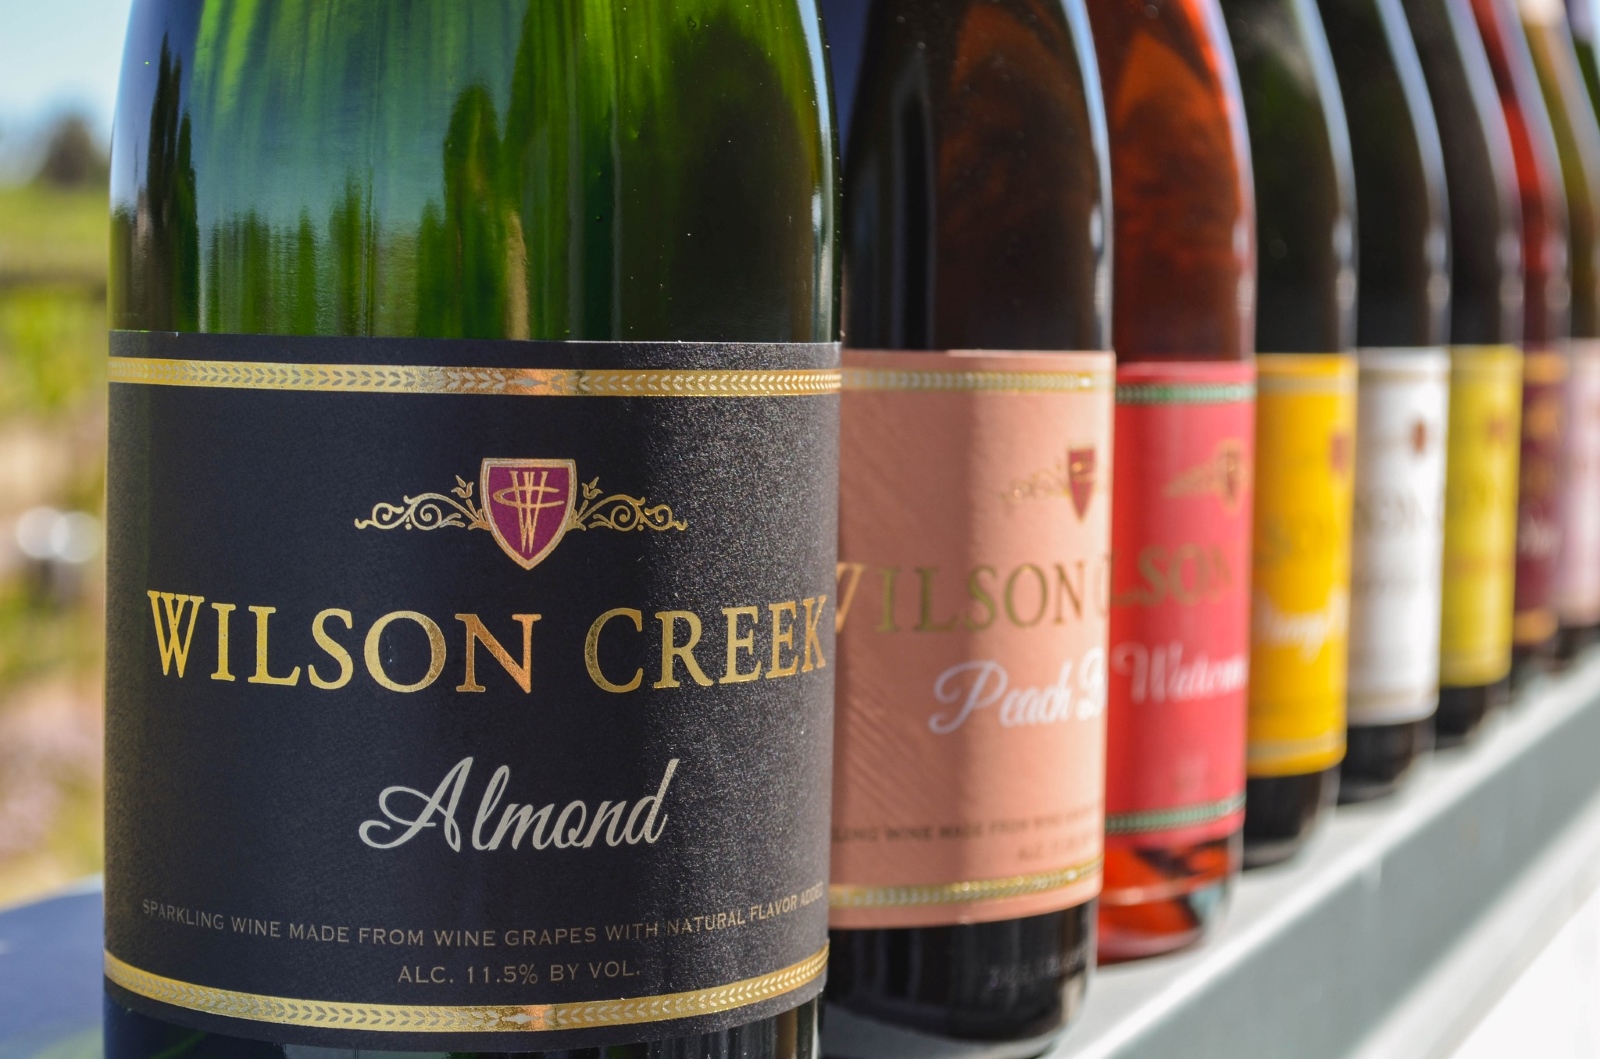 Bottles of Wilson's Creek Winery wines, with different colored labels, are lined up on a ledge.